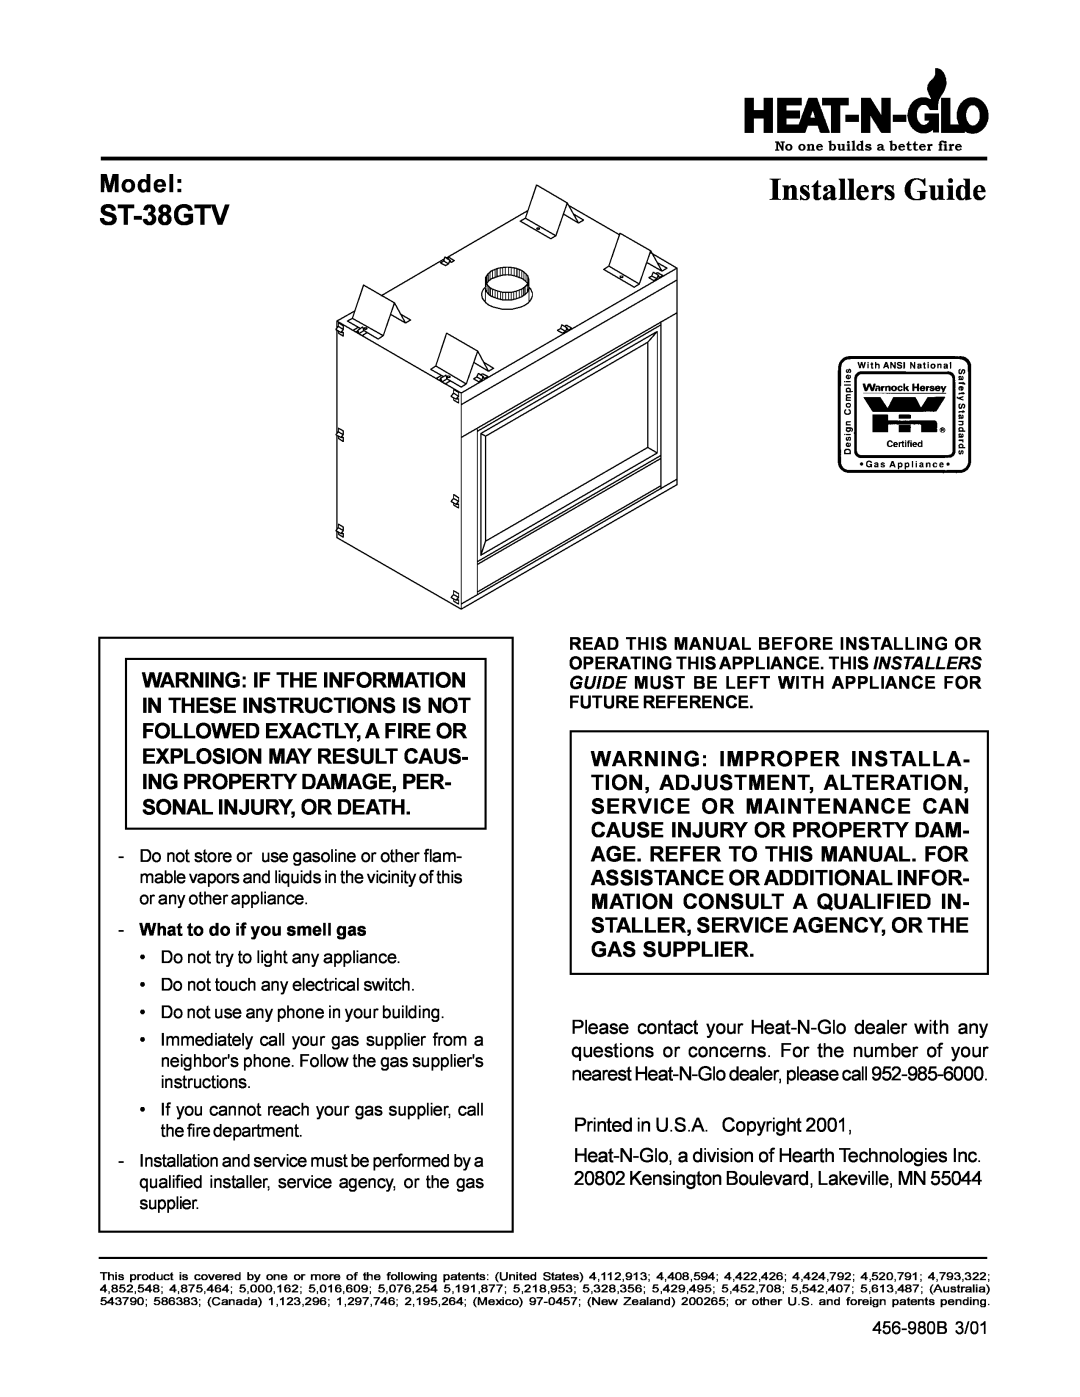 Heat & Glo LifeStyle ST-38GTV manual Model, Installers Guide, What to do if you smell gas 